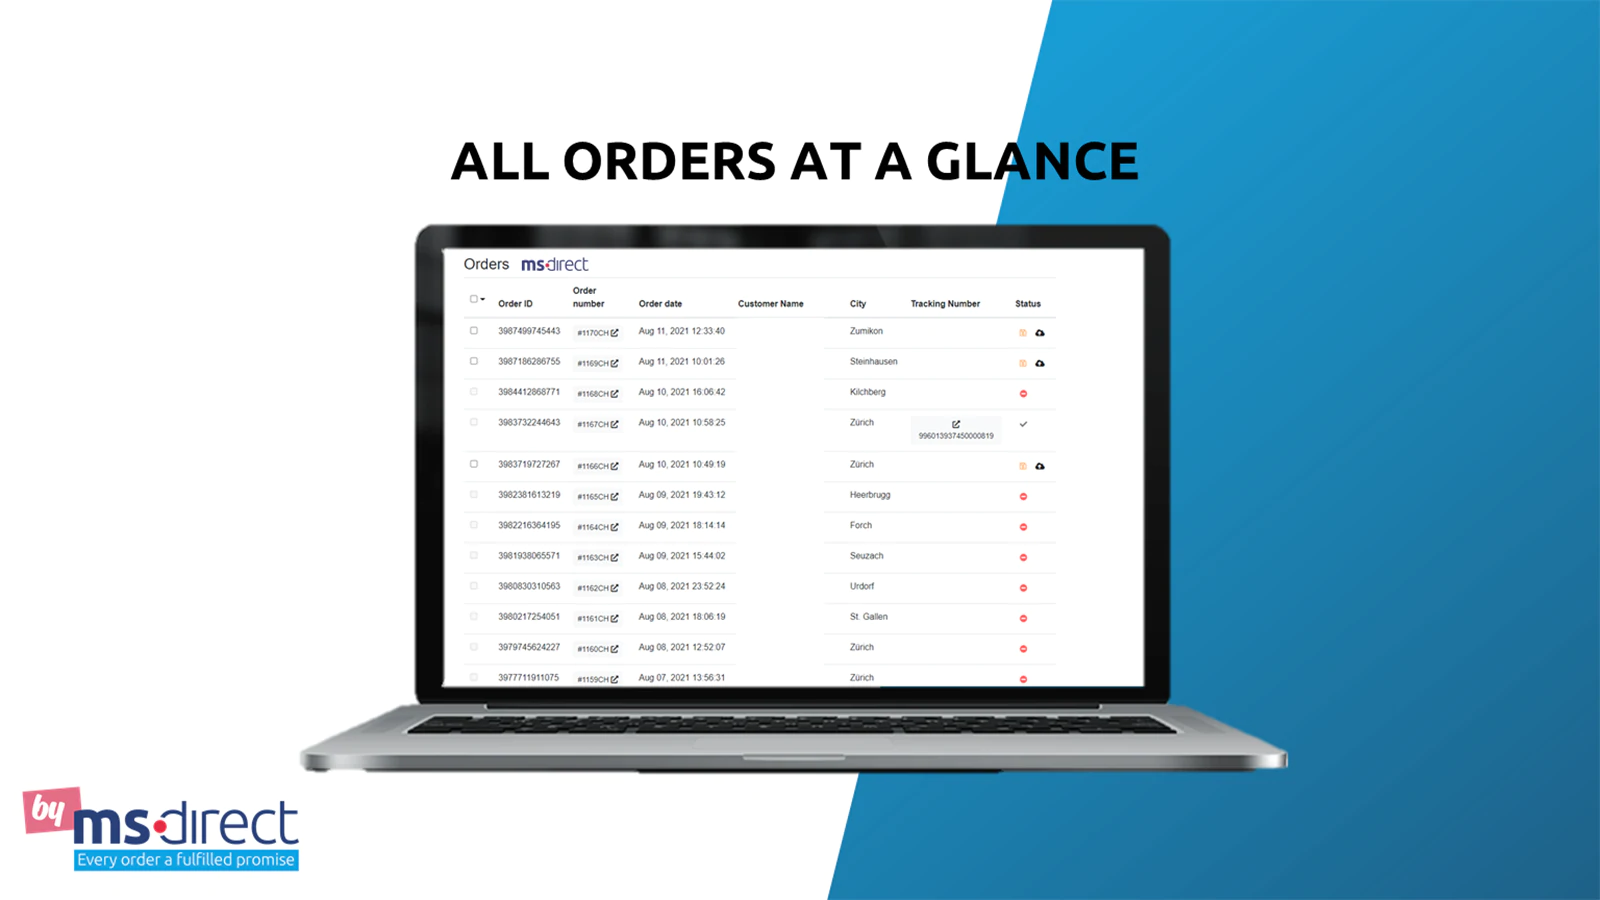 msdirect orders